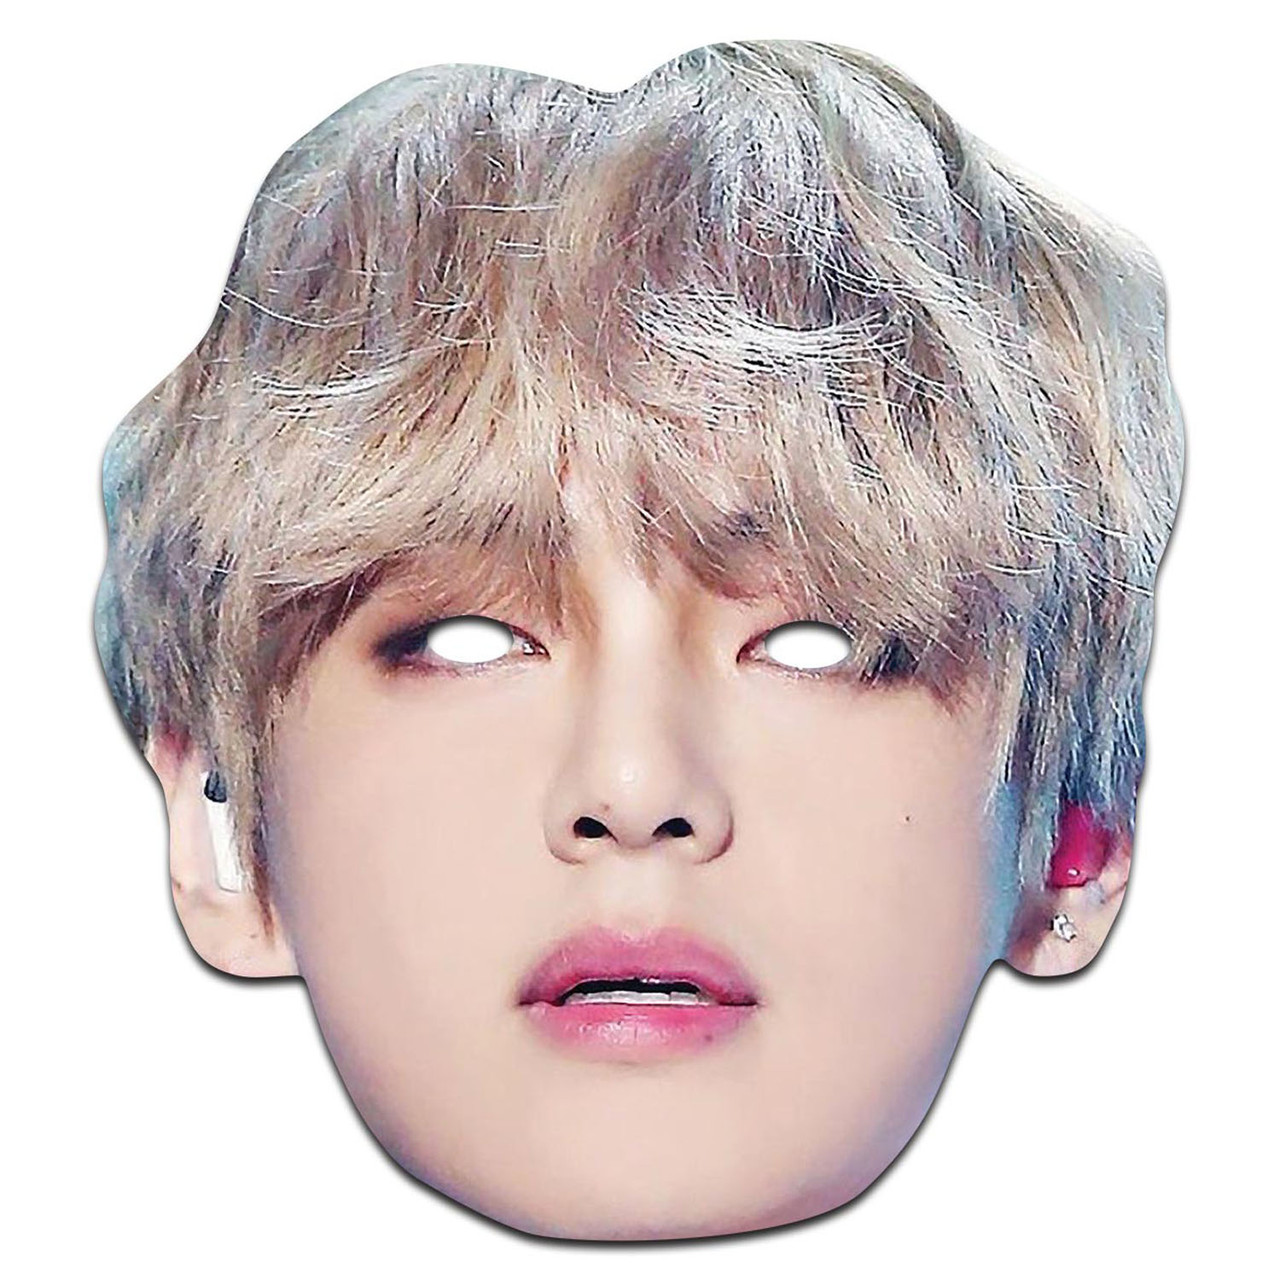 BTS with faces mask